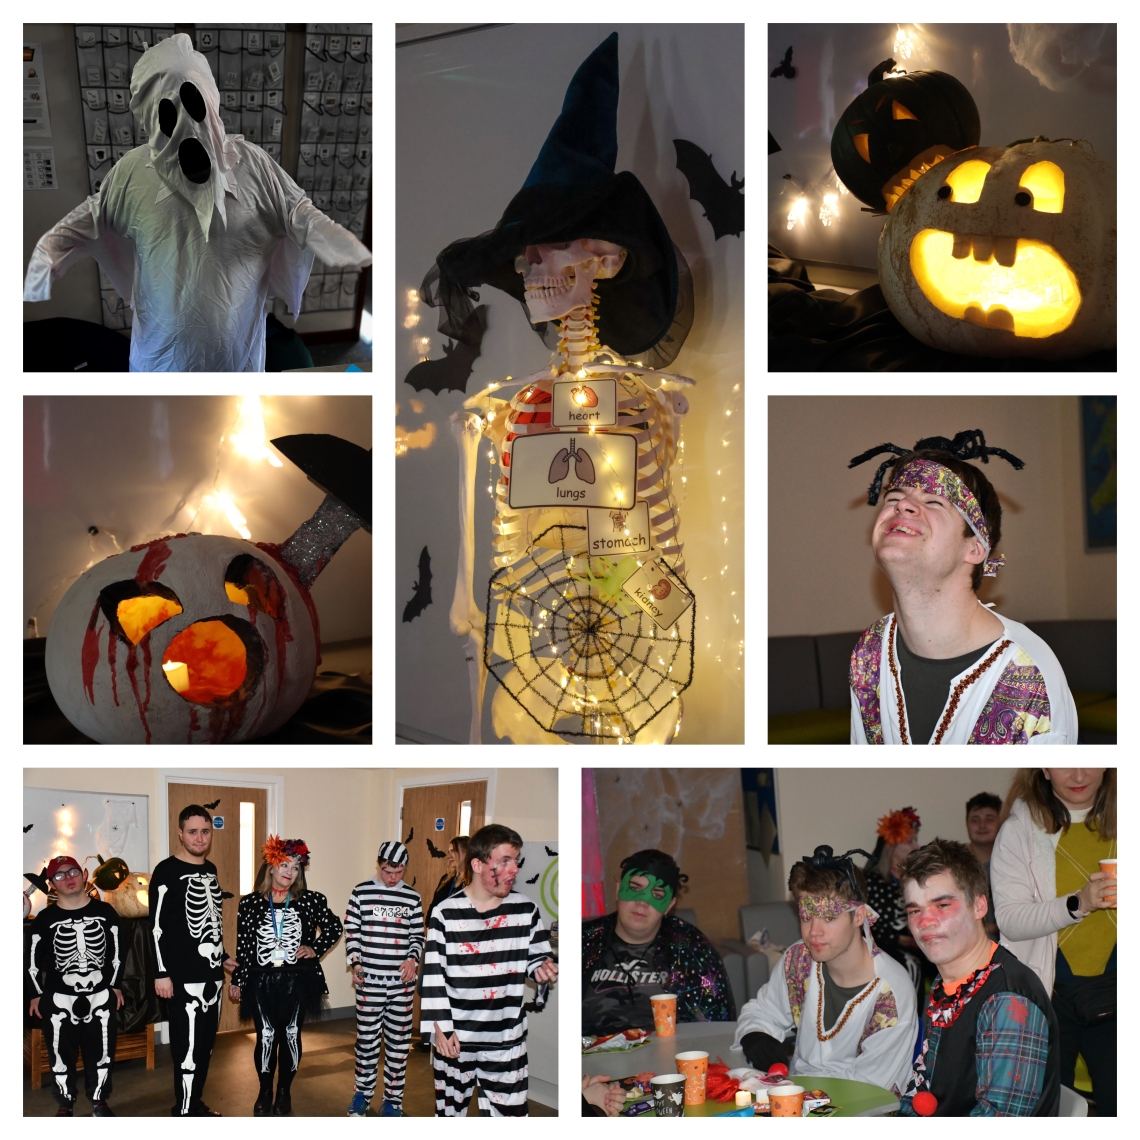 Learners in their Halloween costumes